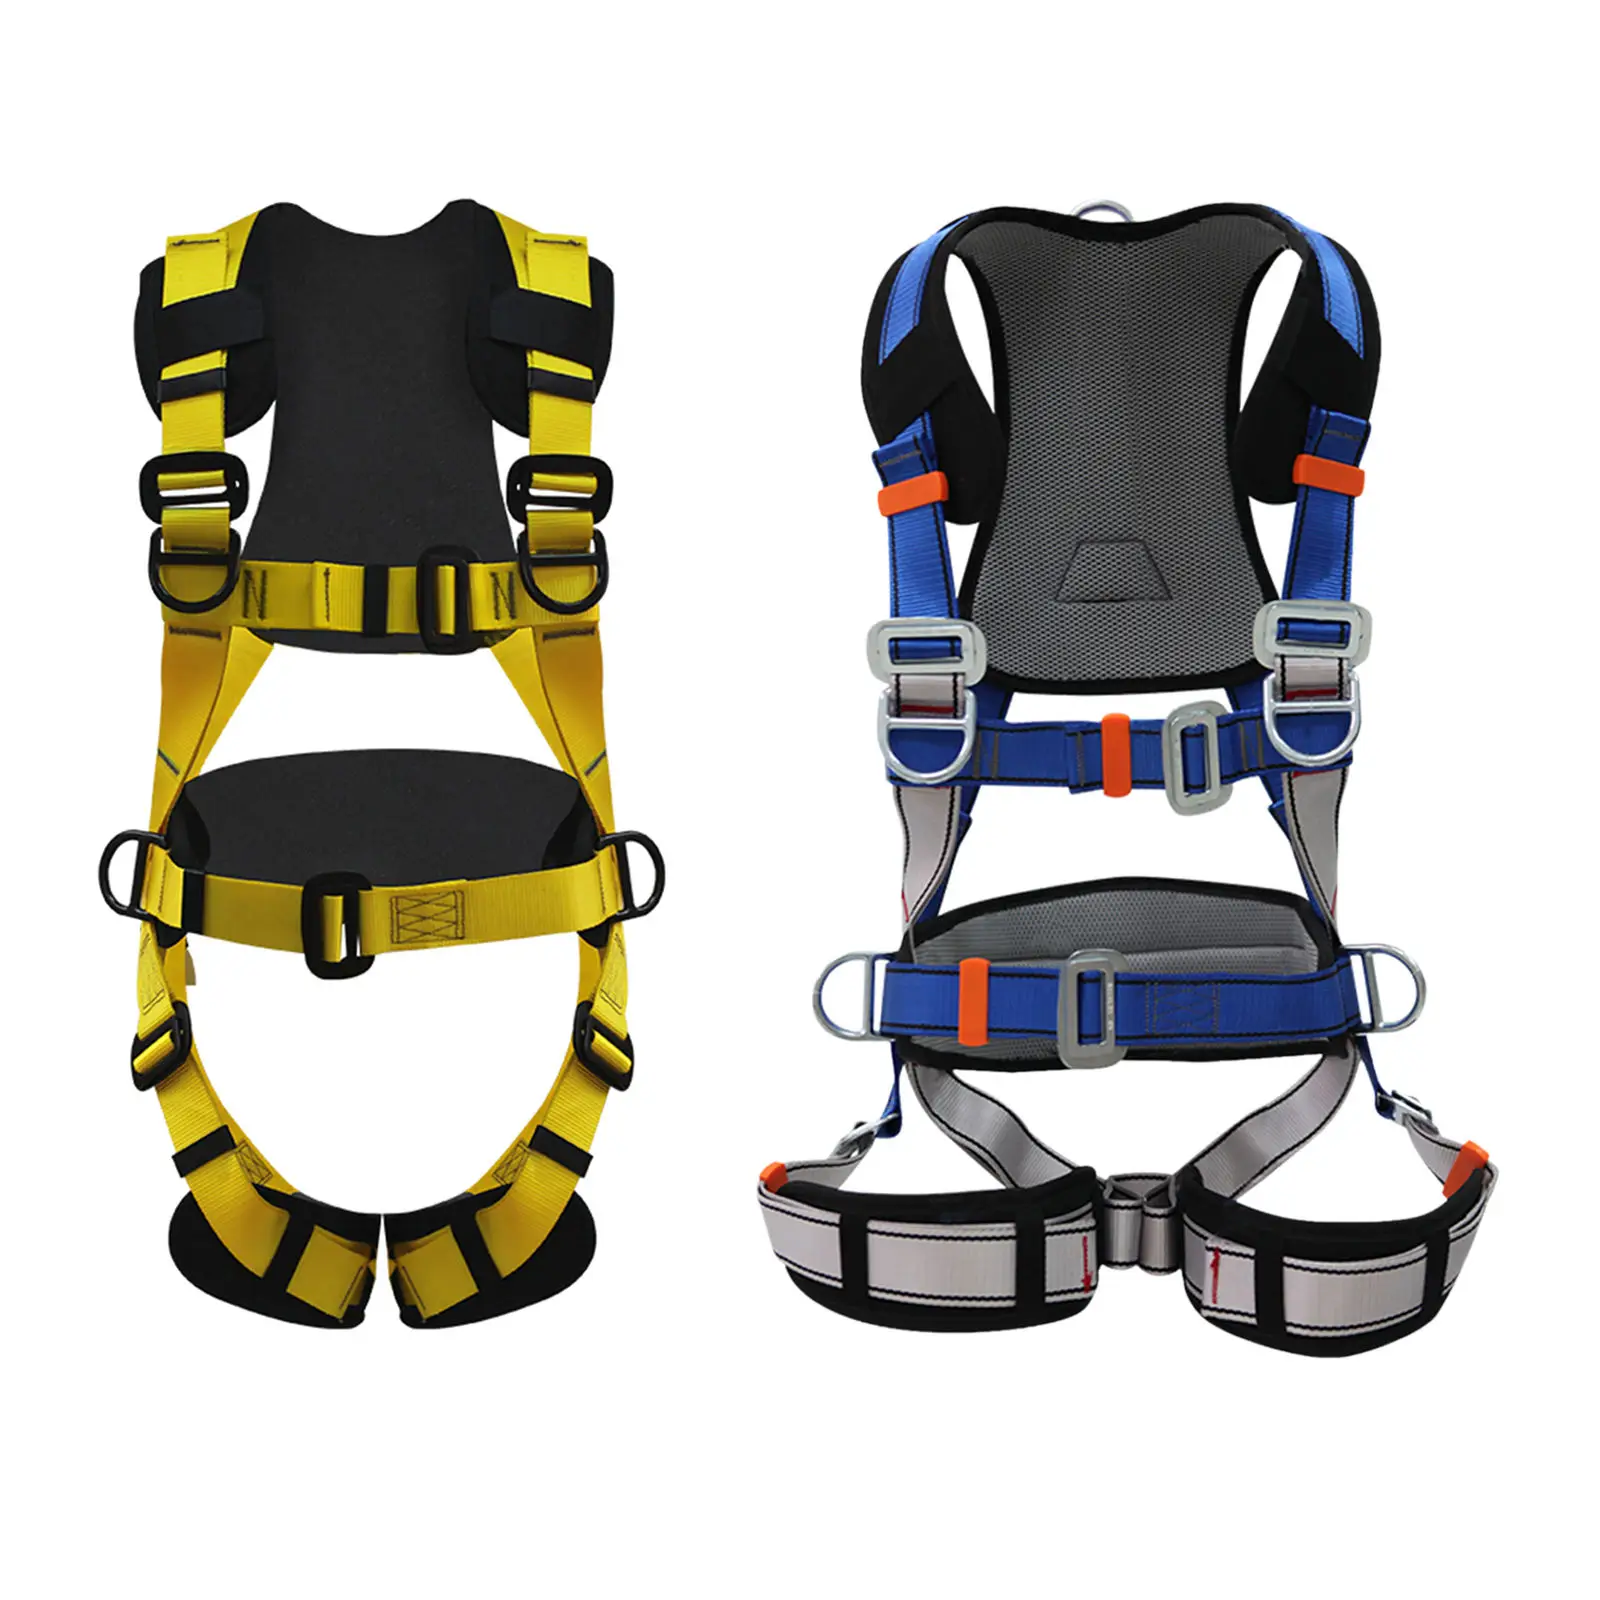 Climbing Harness Outdoor Rock Mountain Climbing Rappelling Safety Belt Harness Equip Full Body Safety Harness Fall Protection